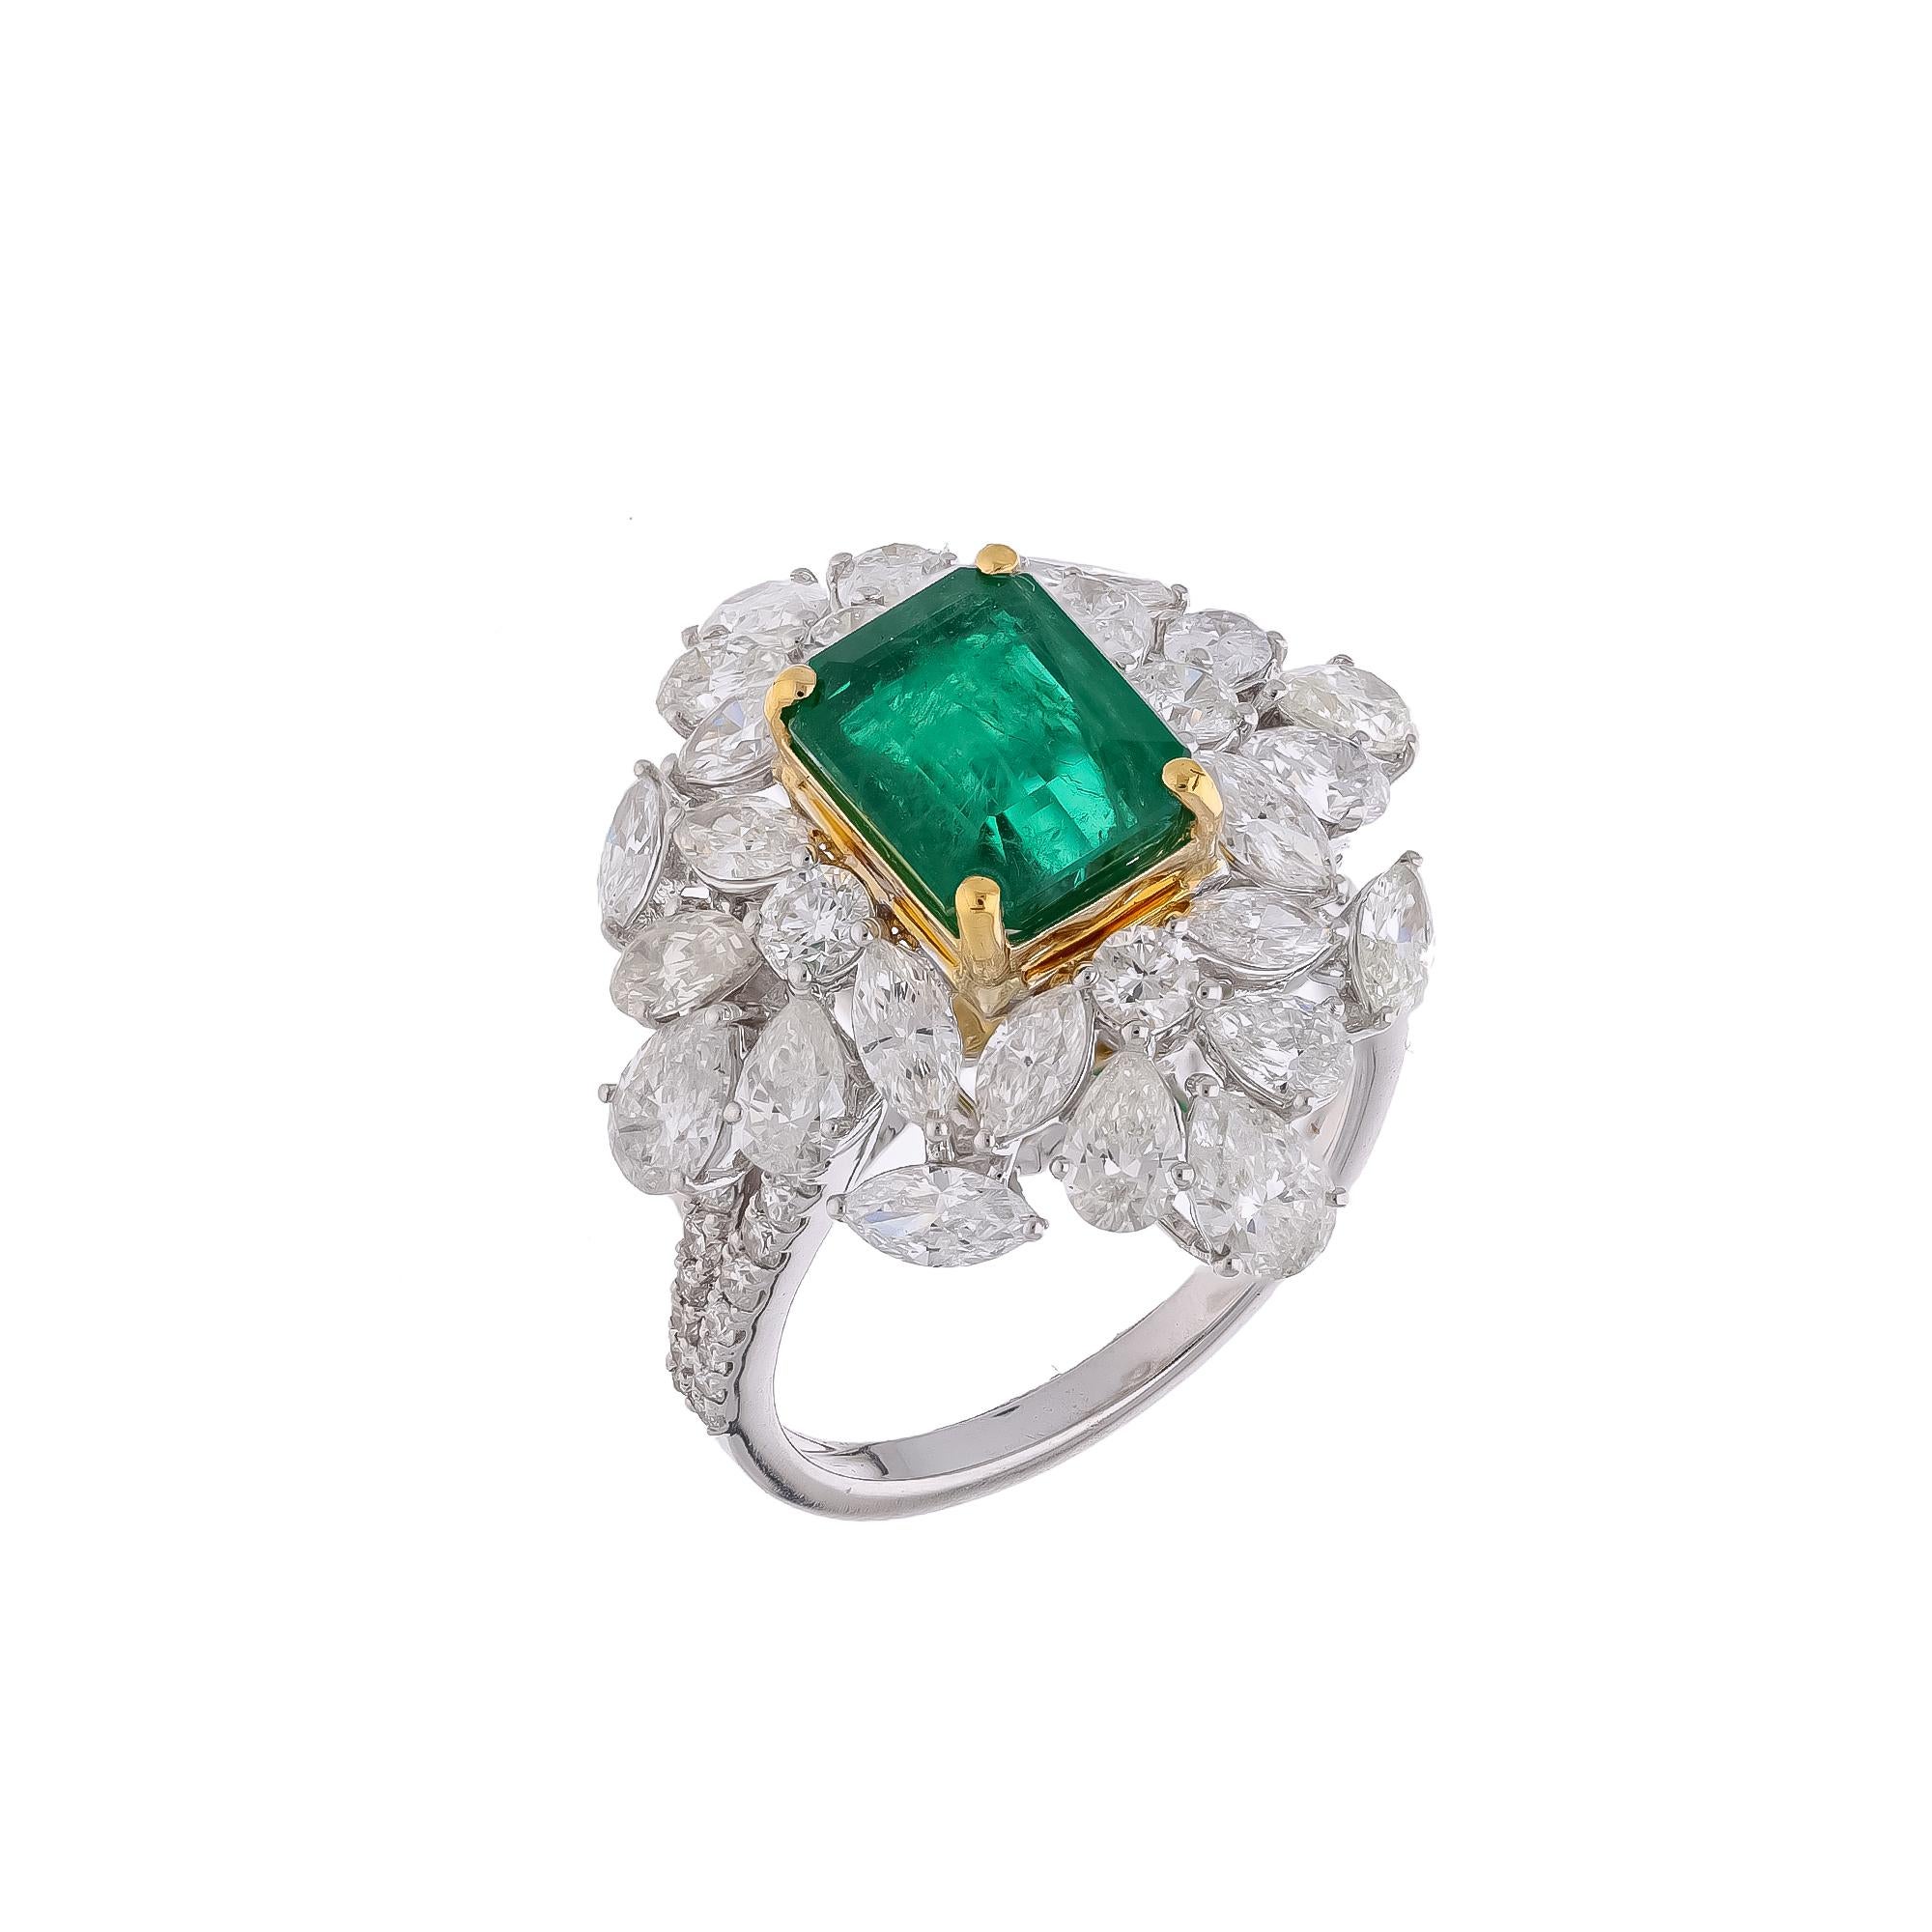 Natural Zambian Emerald Ring with Diamonds and 18k Gold In New Condition For Sale In New York, NY